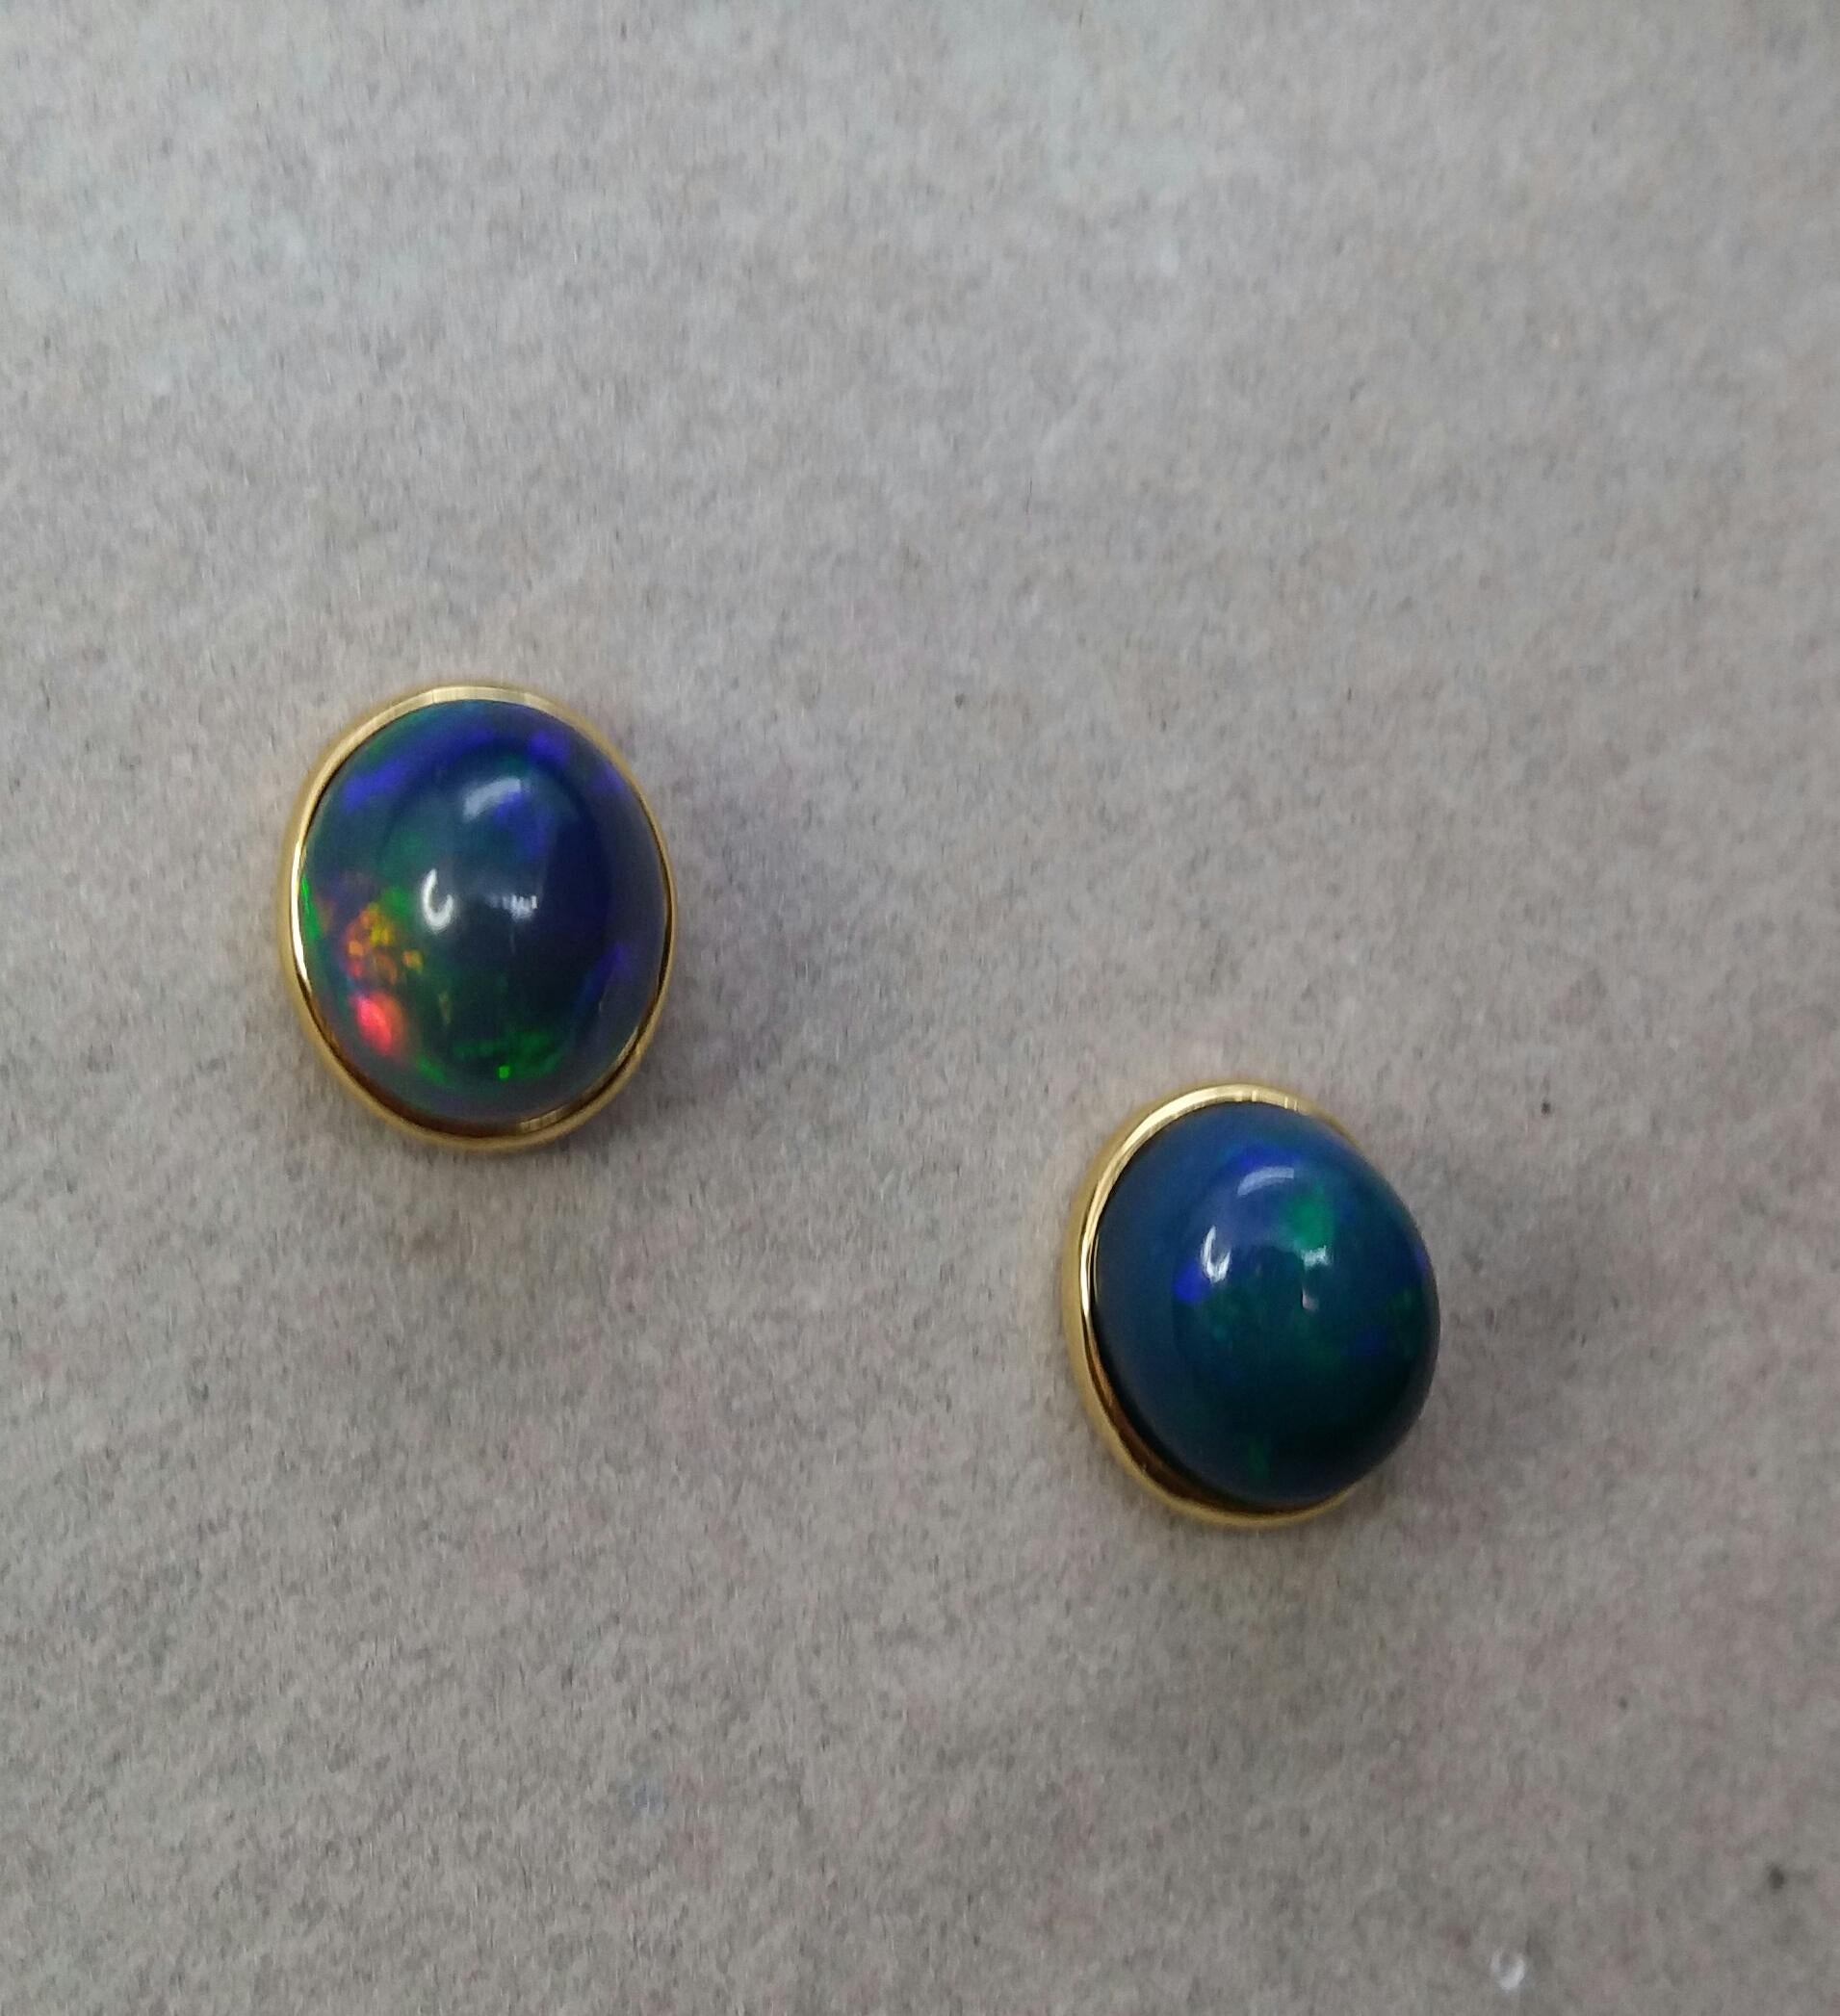 Cabochon Natural Solid Black Opal Oval Cabs 14 Karat Yellow Gold Stud Earrings